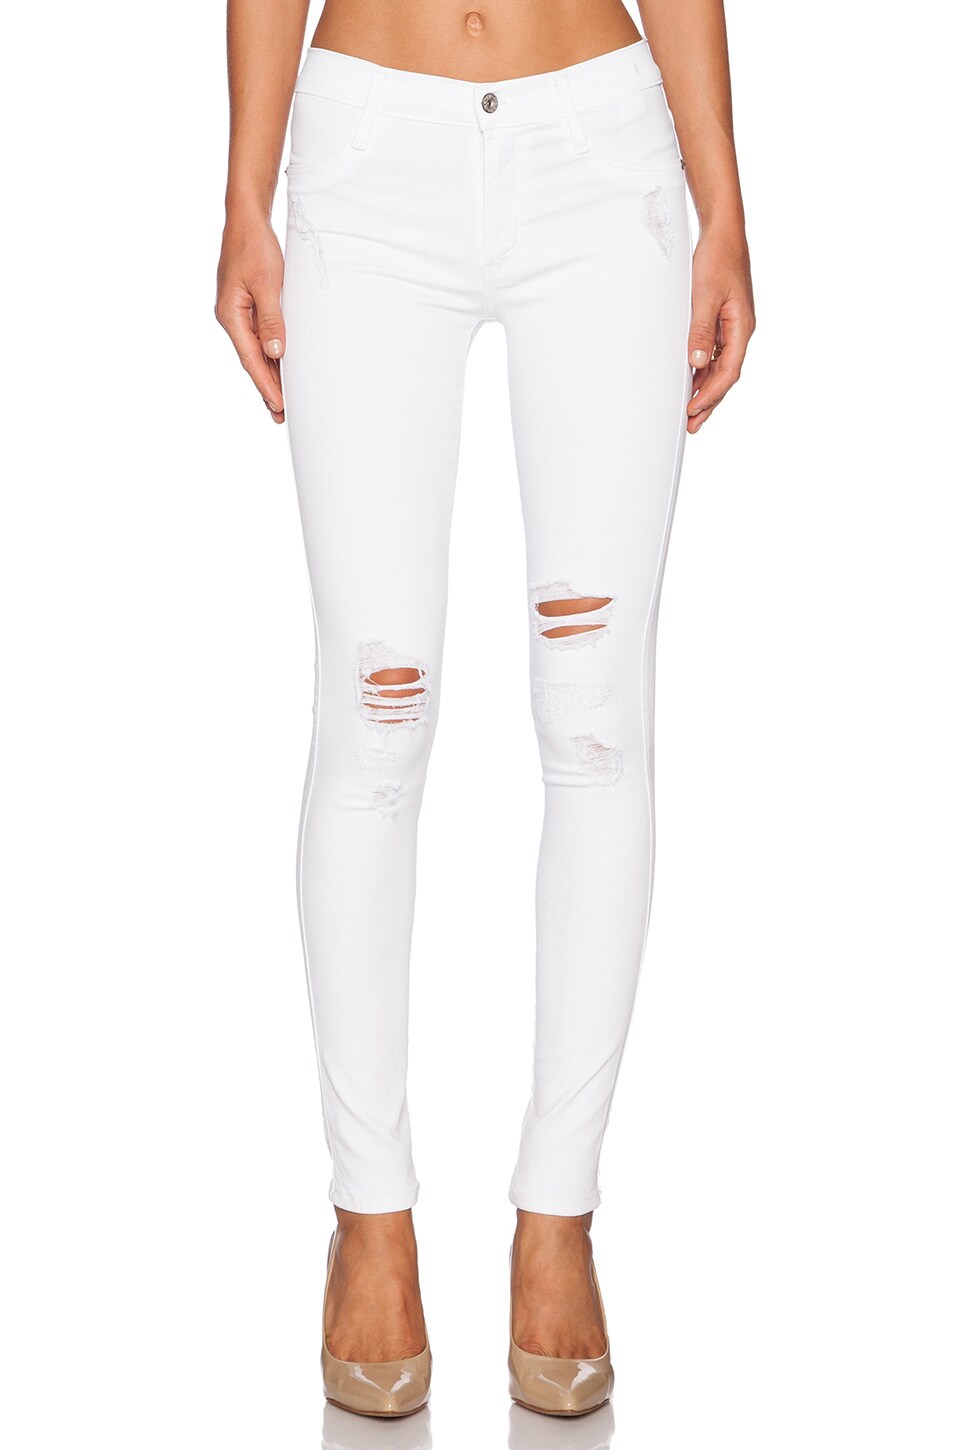 James Jeans James Twiggy Ultra Flex Legging in White Clean Distressed ...